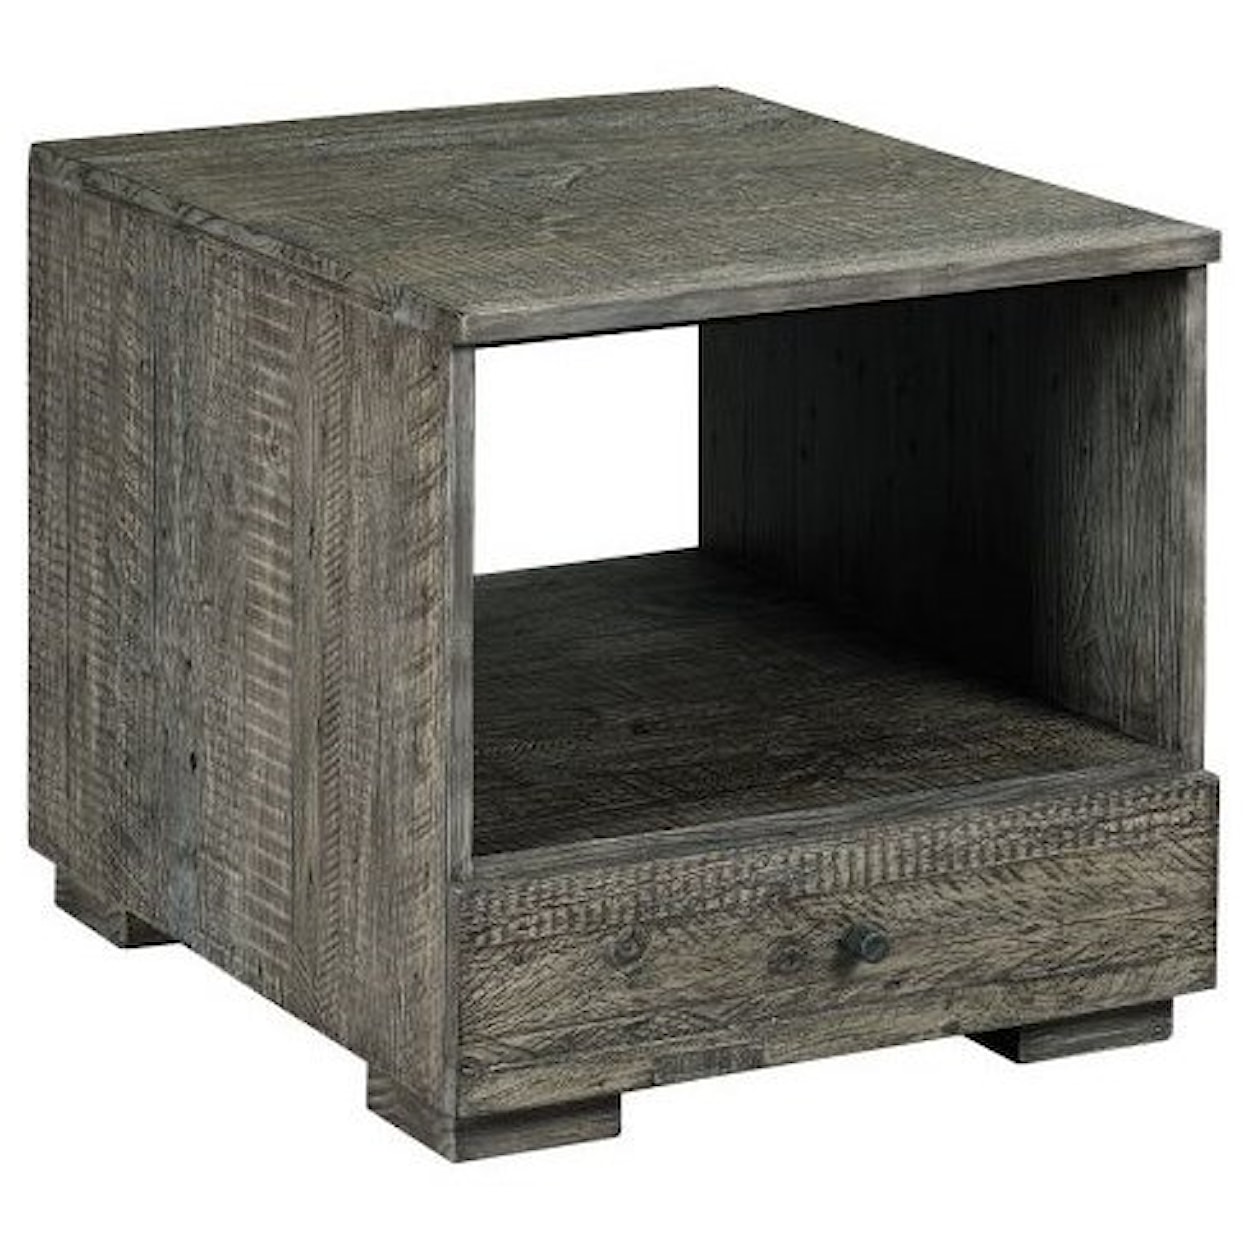 Hammary Reclamation Place Shiplap  Rectangular End Table